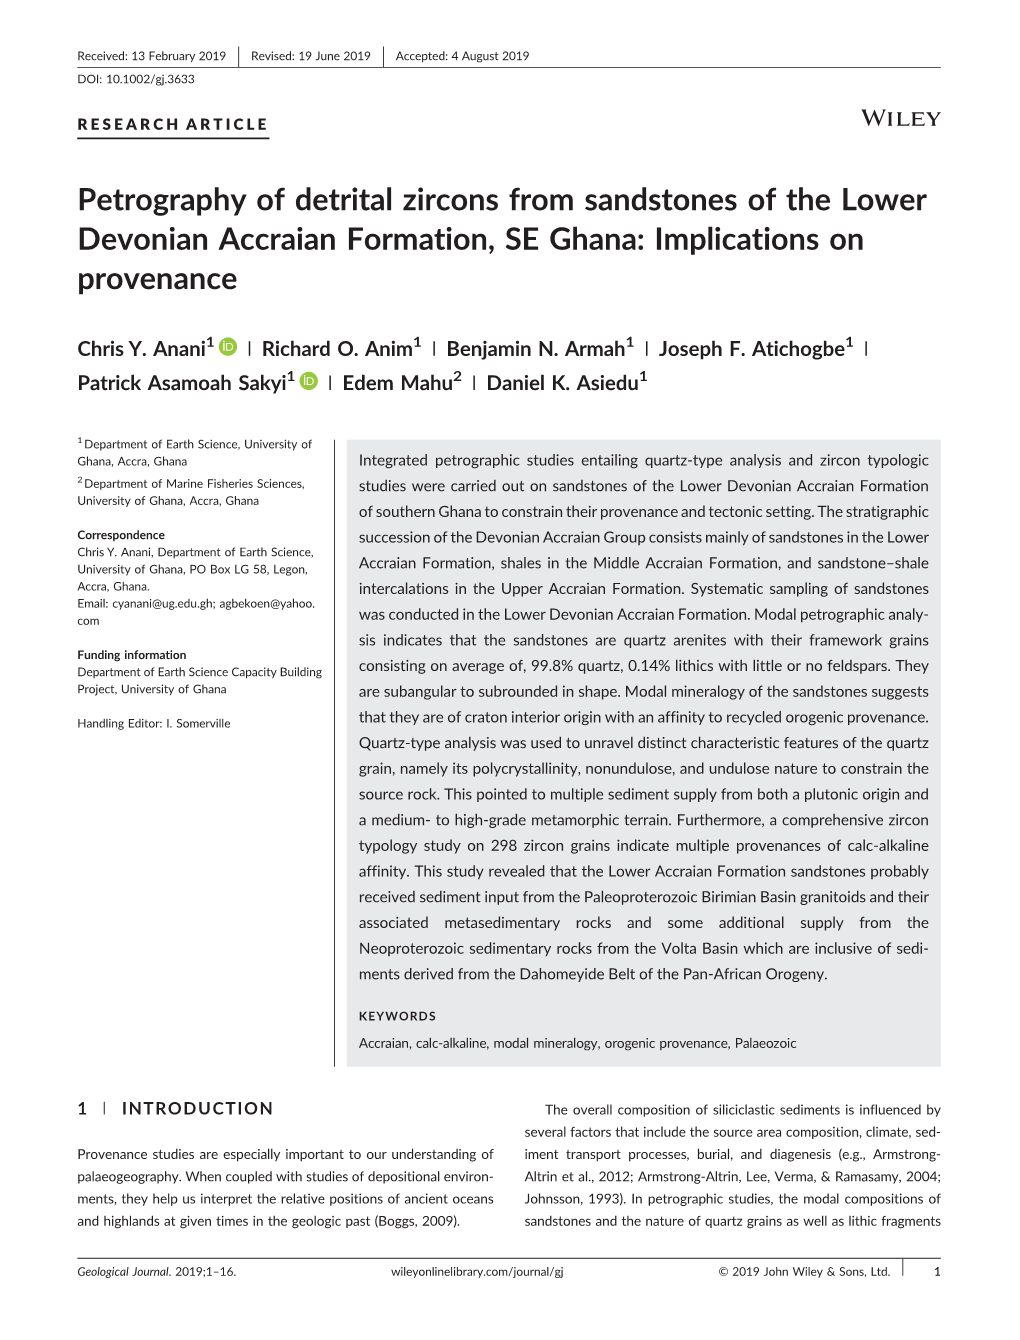 Petrography of Detrital Zircons from Sandstones of the Lower Devonian Accraian Formation, SE Ghana: Implications on Provenance